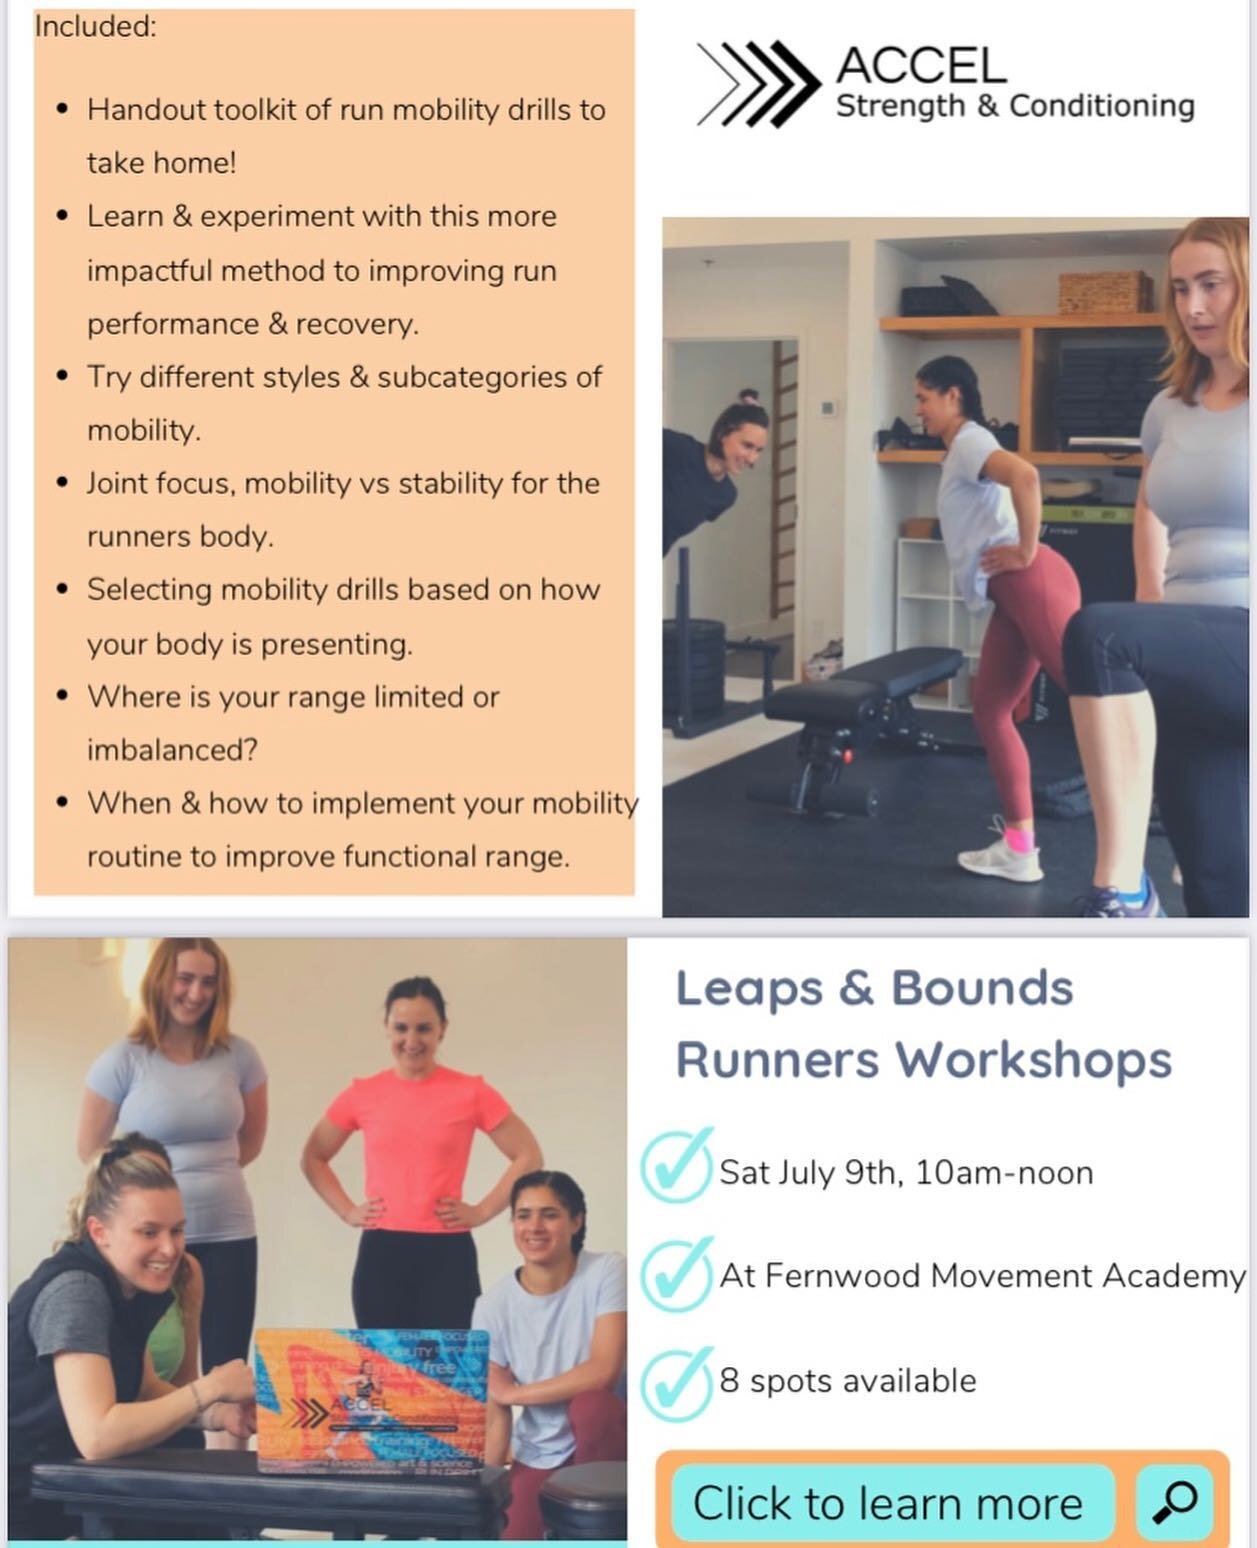 Highly recommended for runners. Holly does some amazing work and being presented at 2 of our favorite locations in Victoria. 
@thirdspacemvmt 
@fernwoodmvmtacademy_ 

Great work by @accelstrengthconditioning 

#physiovictoria #physiotherapistbc #spor